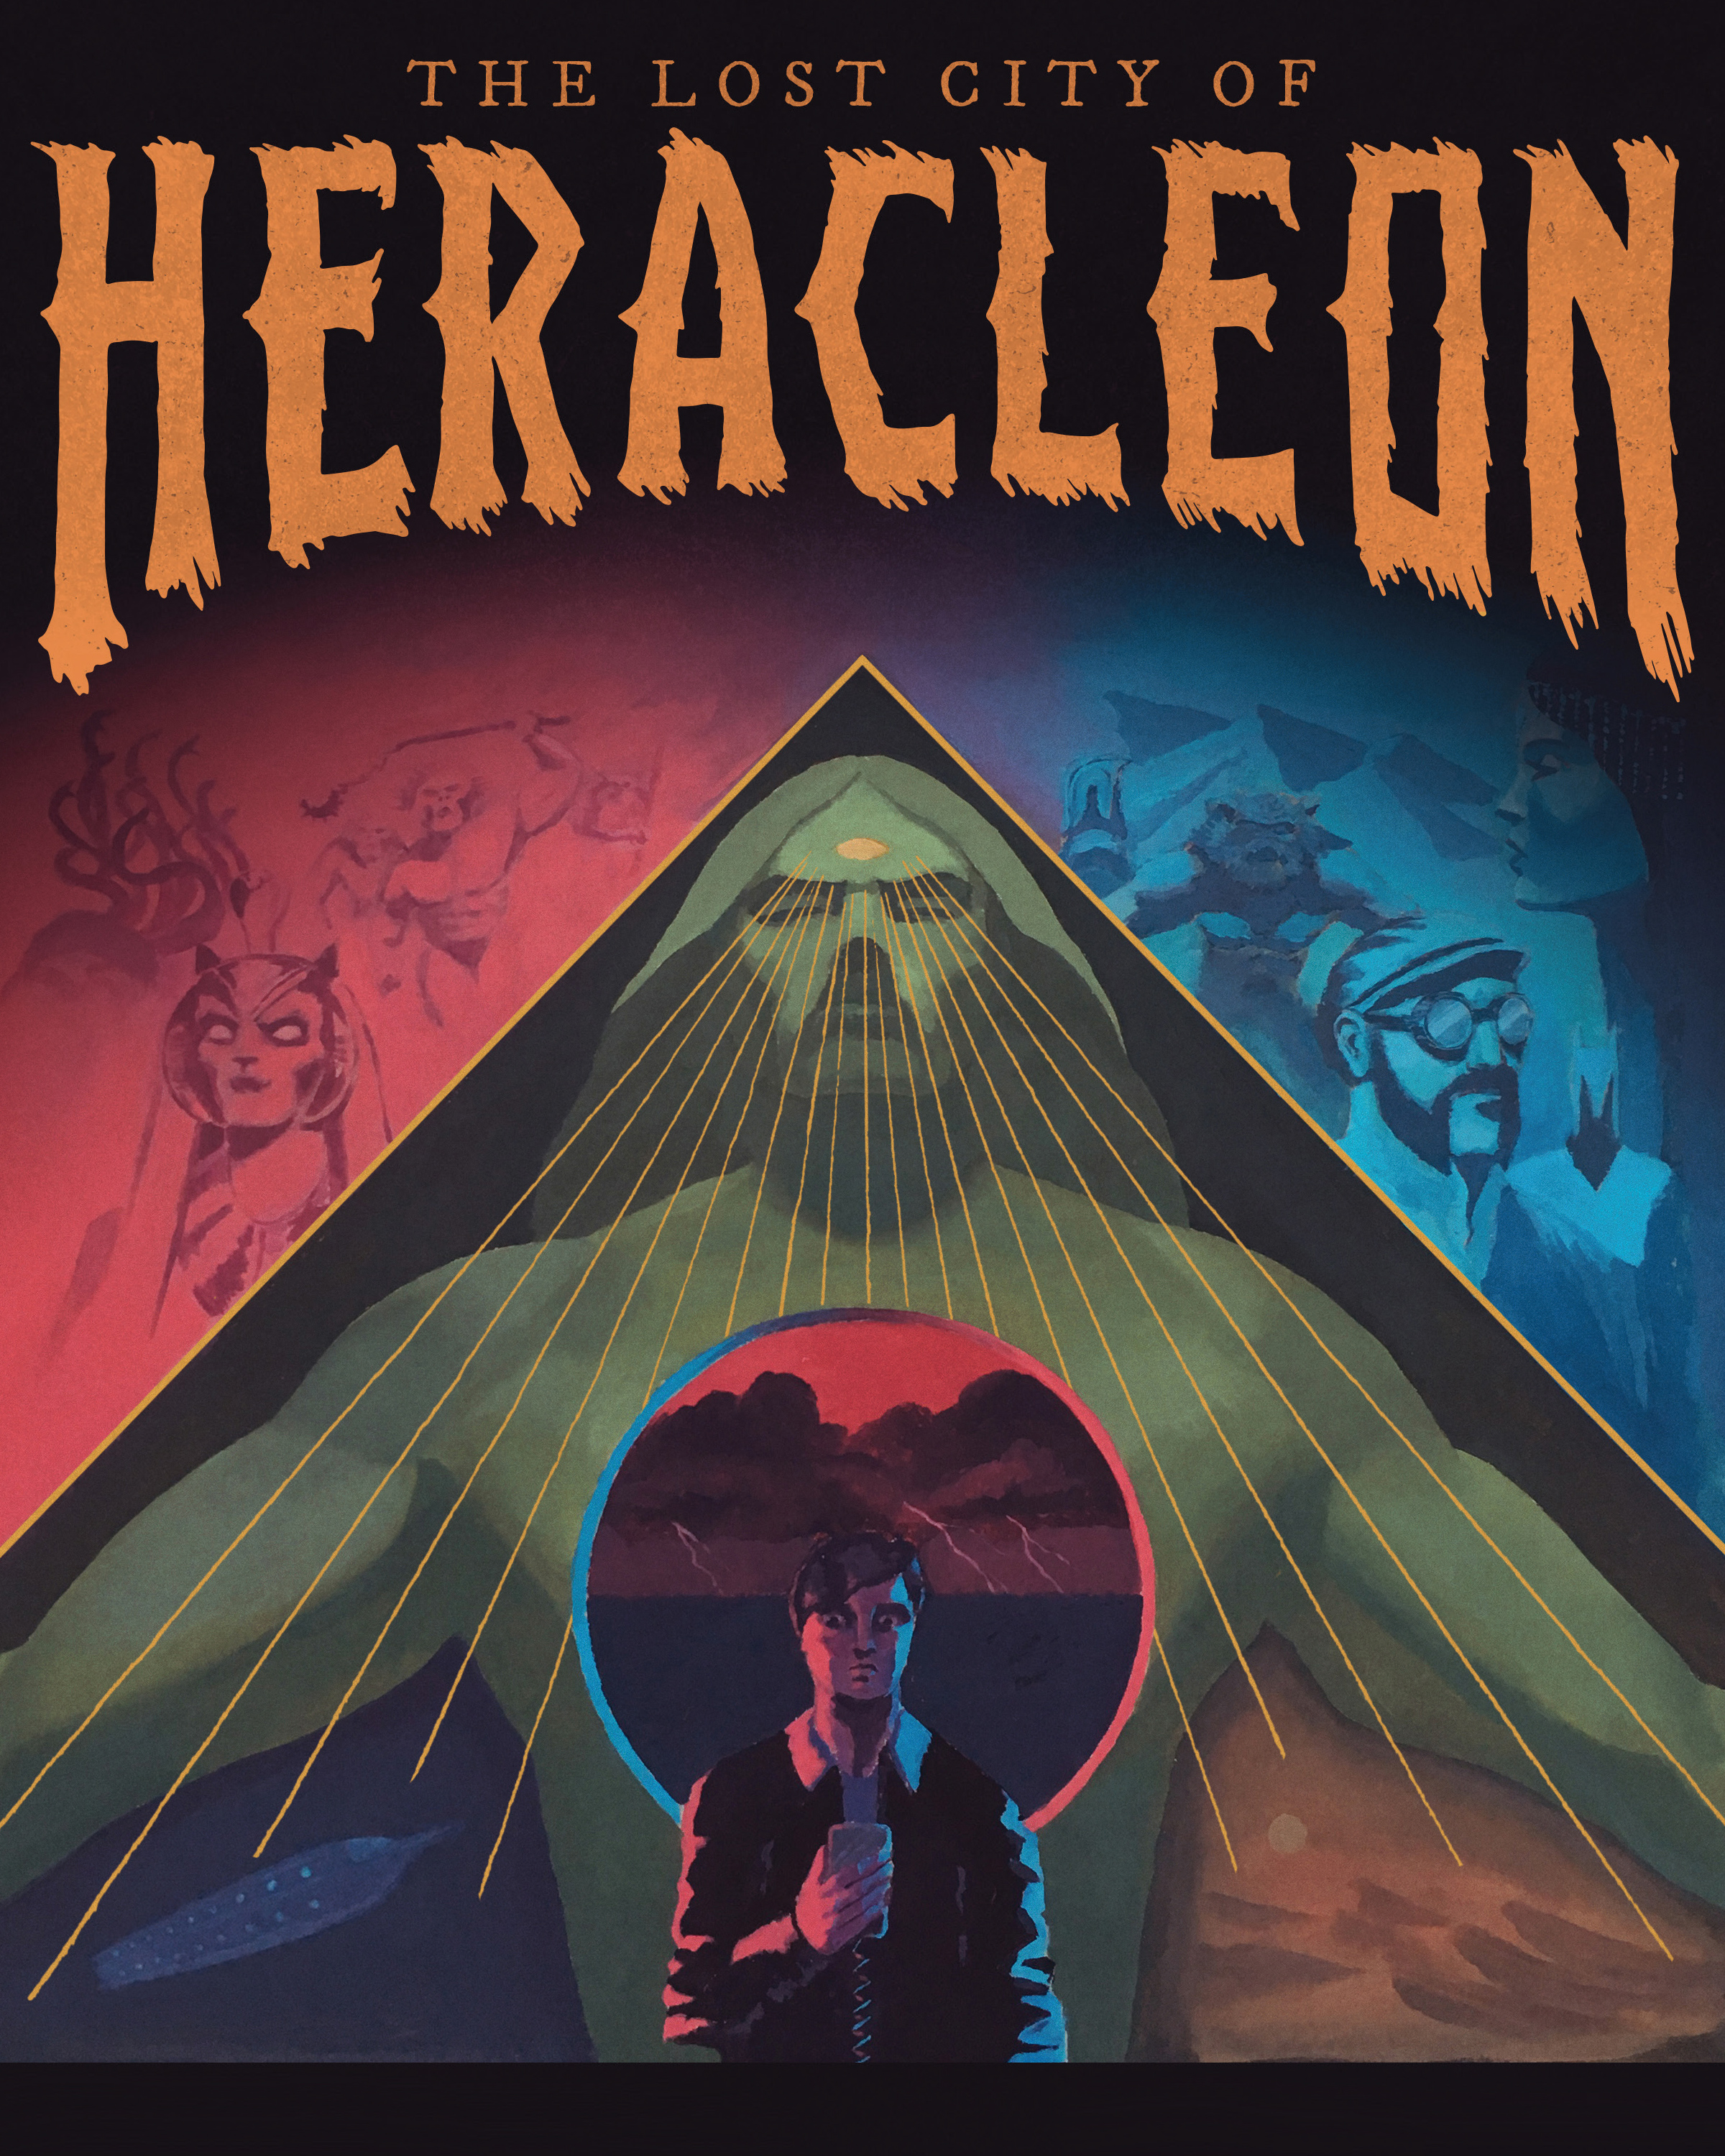 Read online The Lost City of Heracleon comic -  Issue # TPB (Part 2) - 124